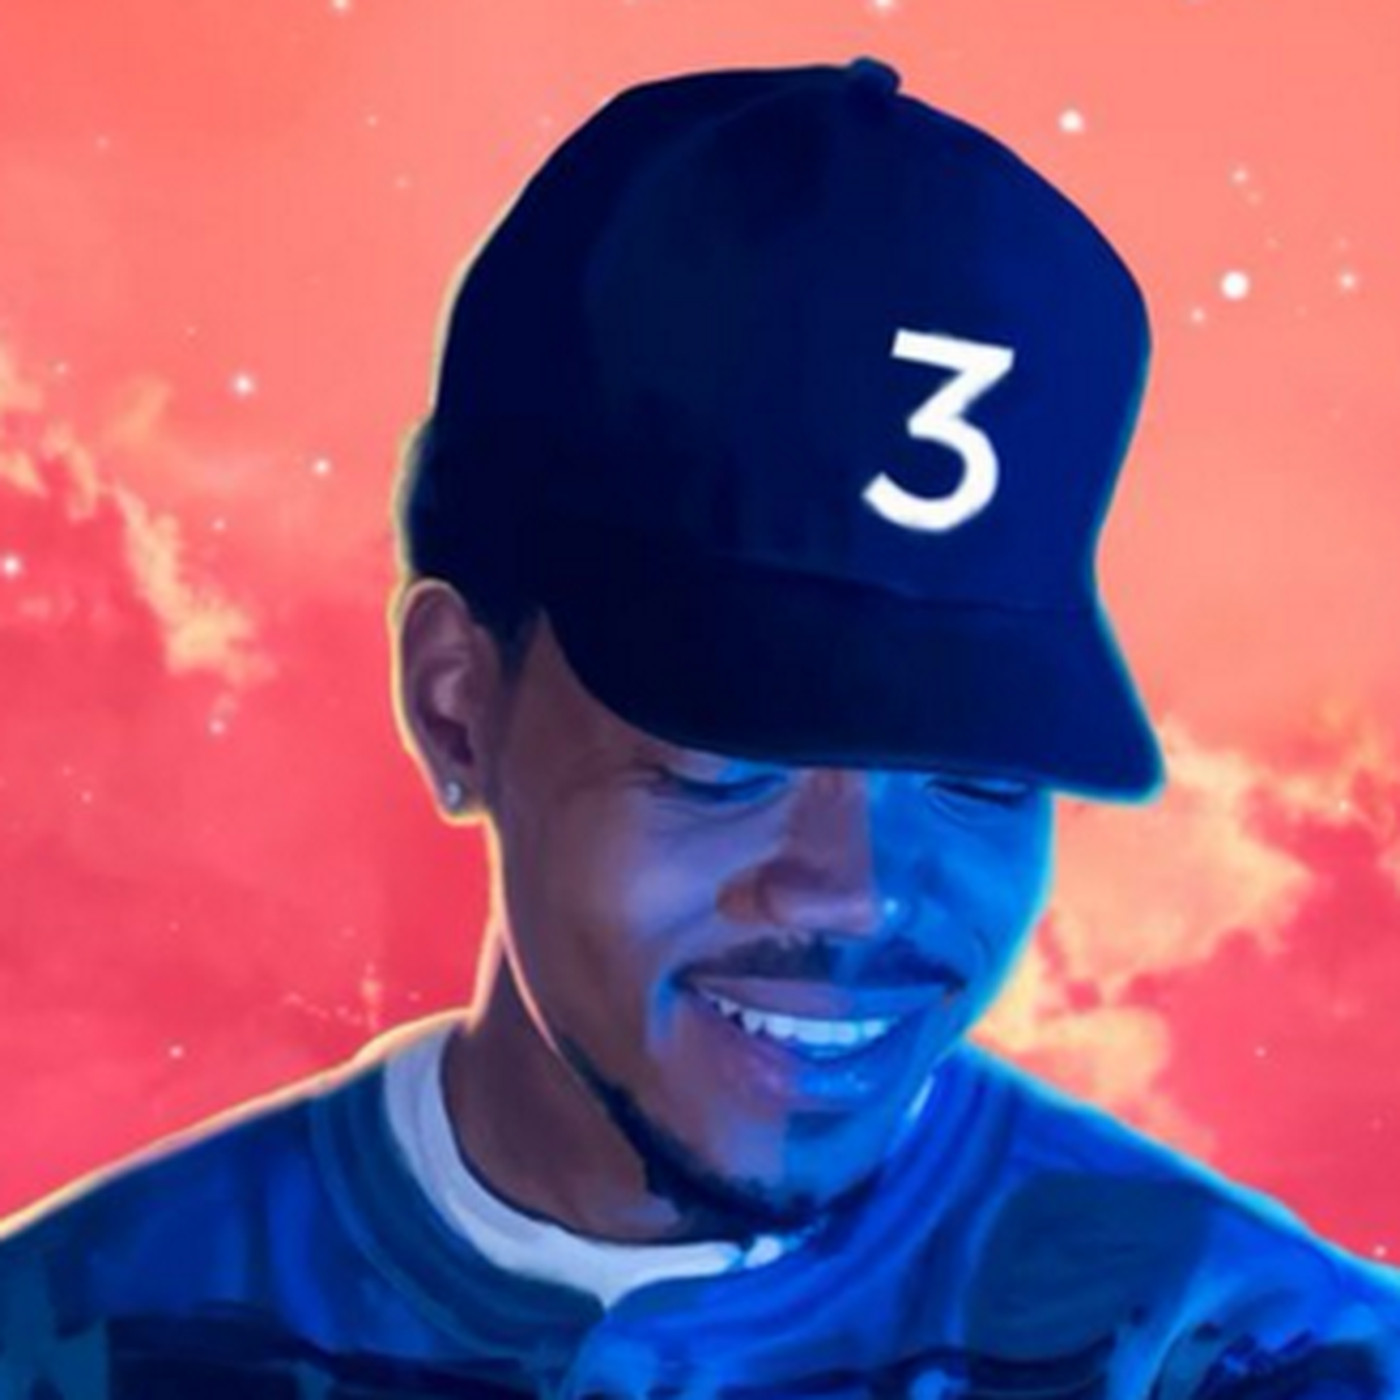 On Coloring Book, Chance the Rapper wades joyfully into new ...